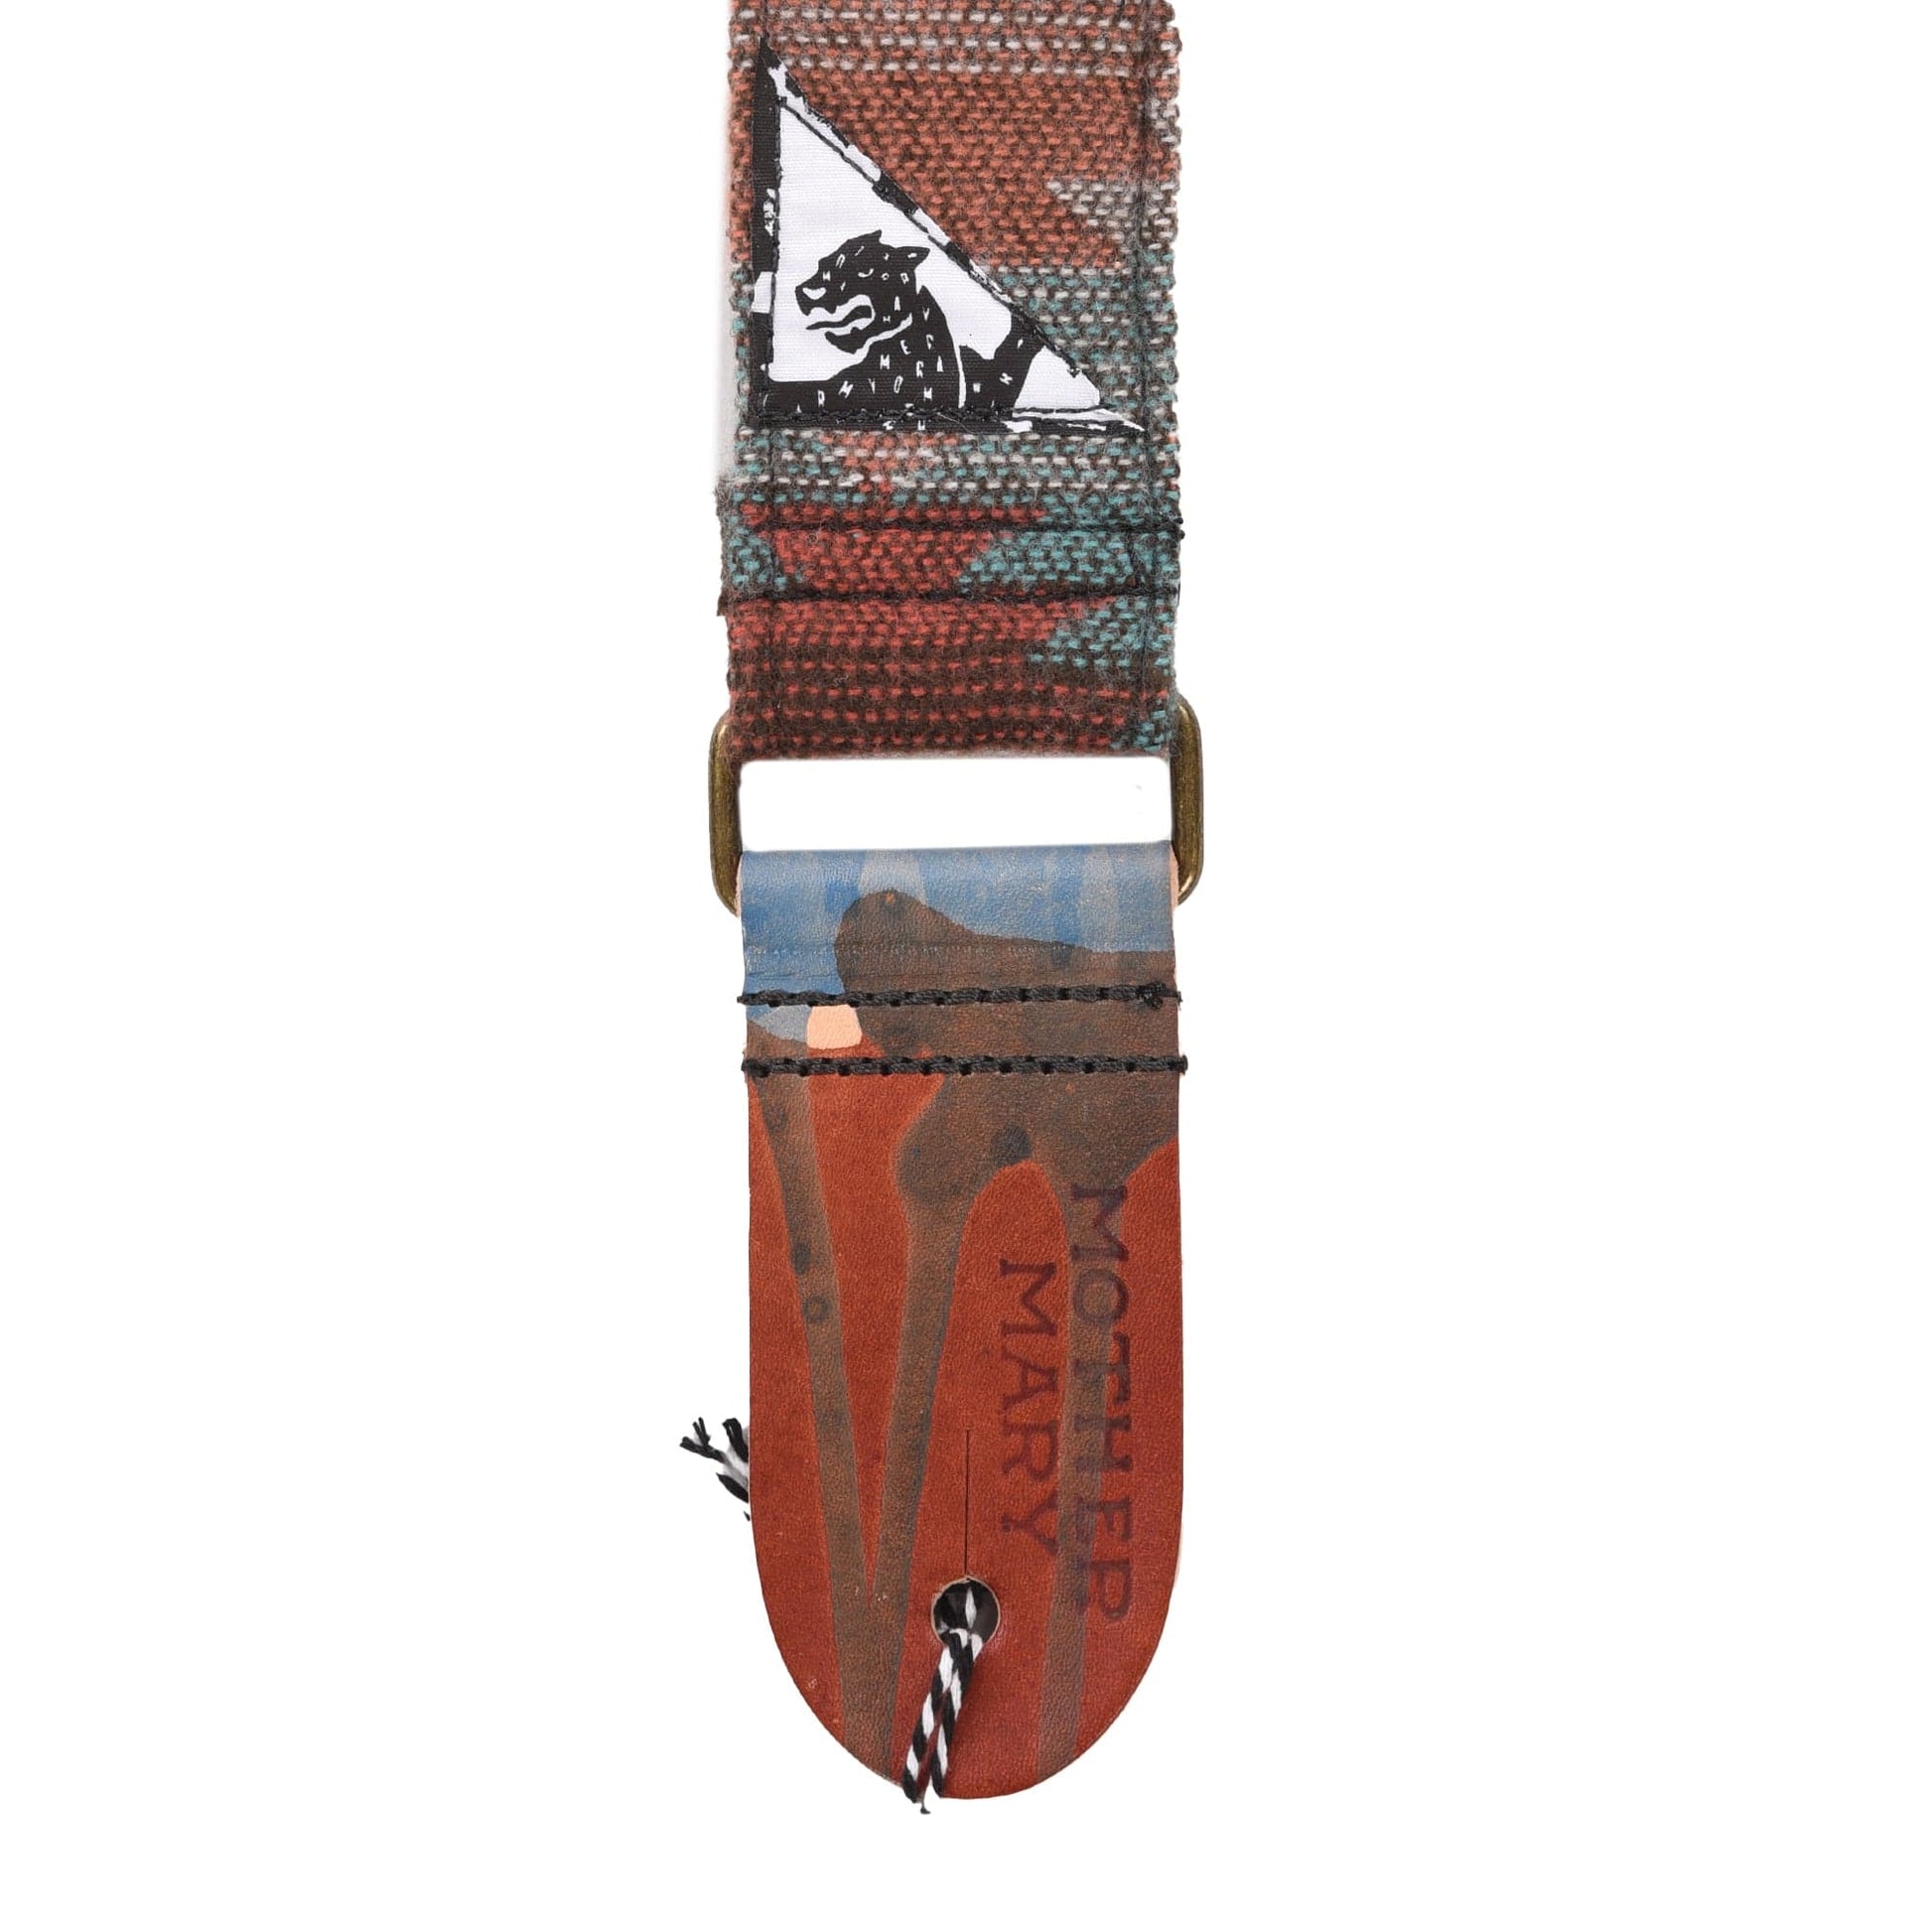 Mother Mary "Appalachian Andy" Guitar Strap Accessories / Straps